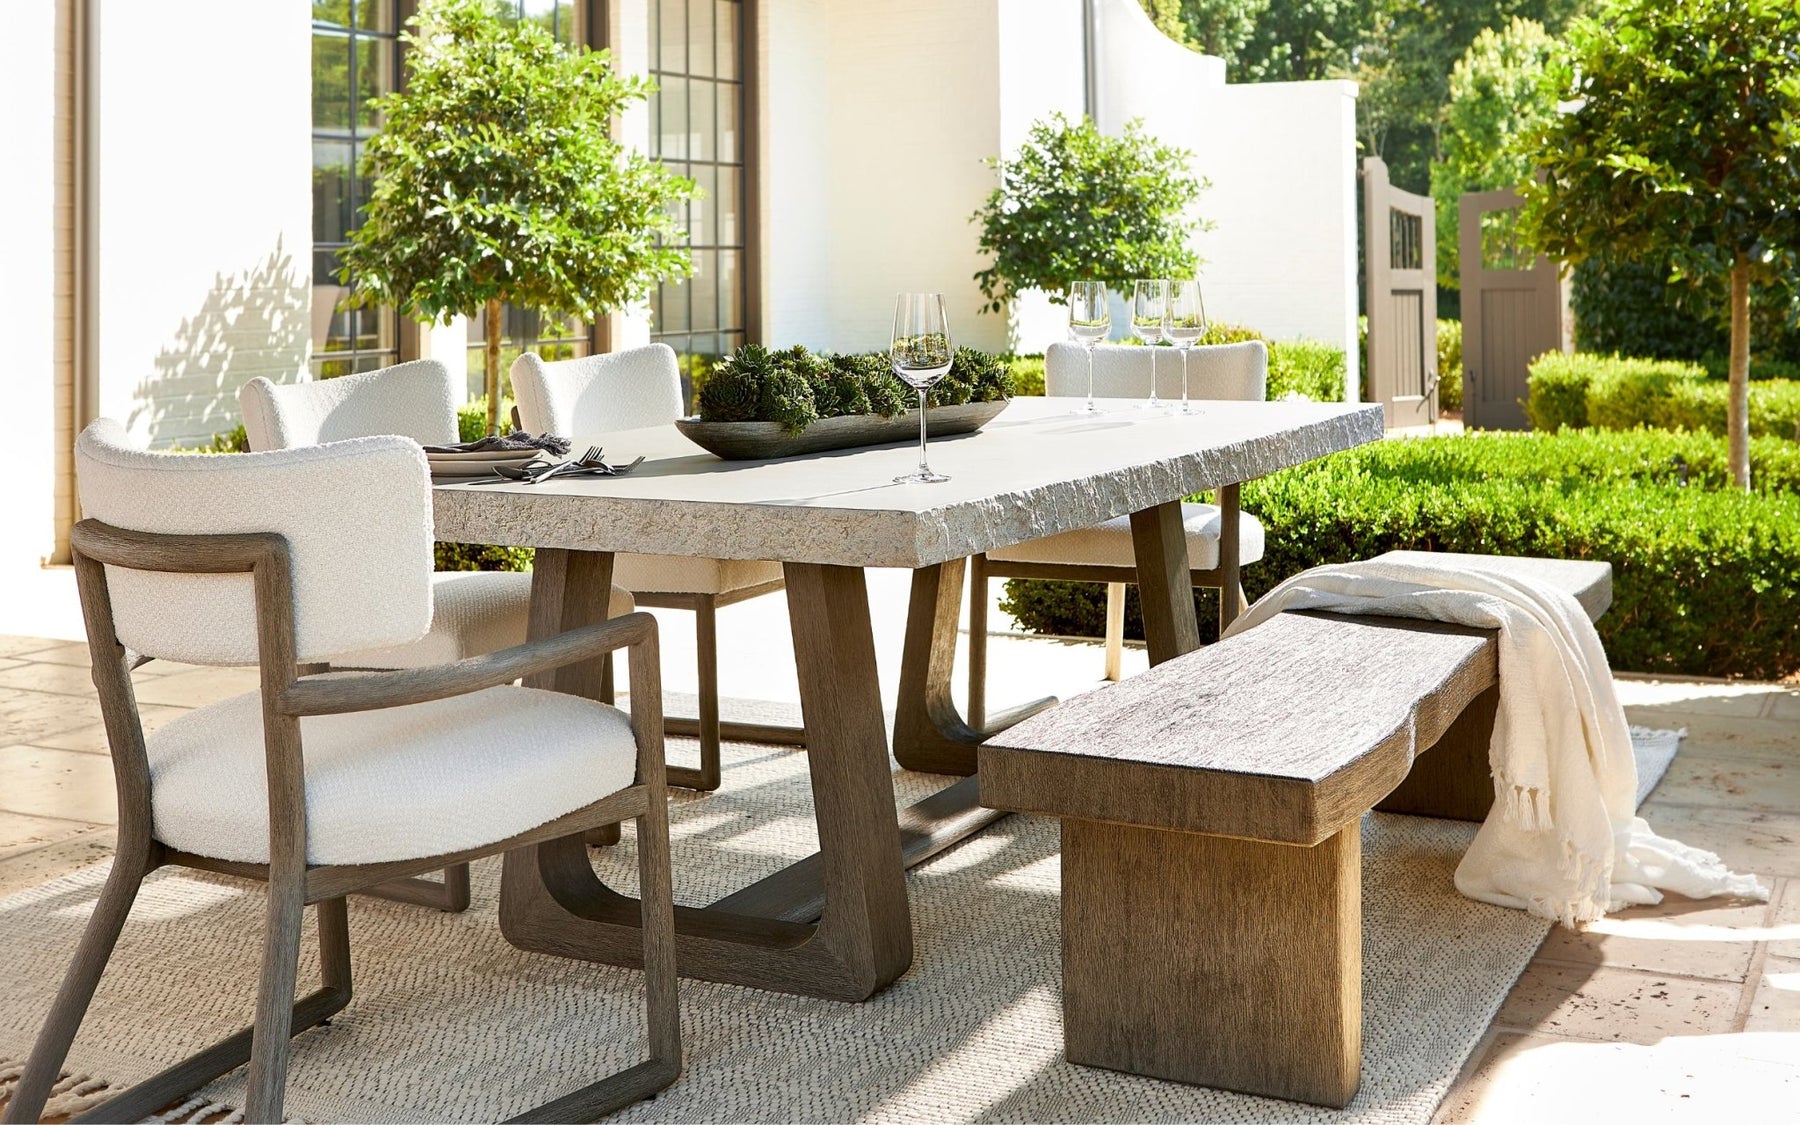 Where to buy patio furniture : A Comprehensive Guide